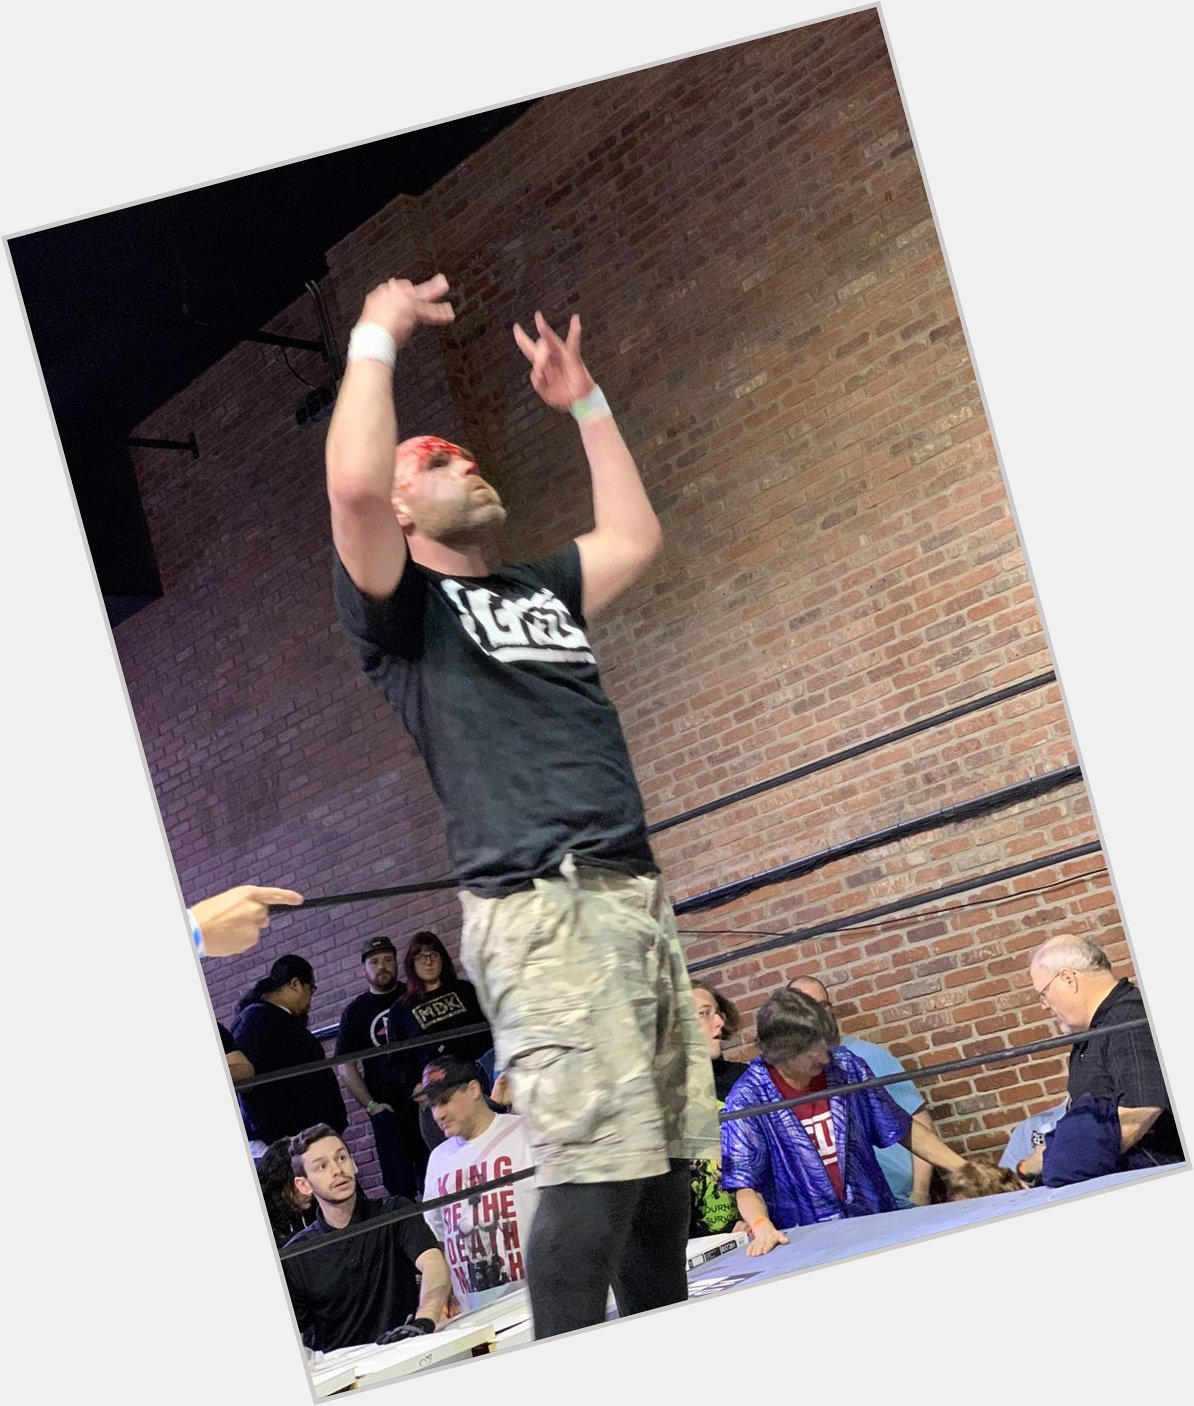 Happy birthday to my favorite wrestler ever. the king of ultraviolence, Nick Gage. 